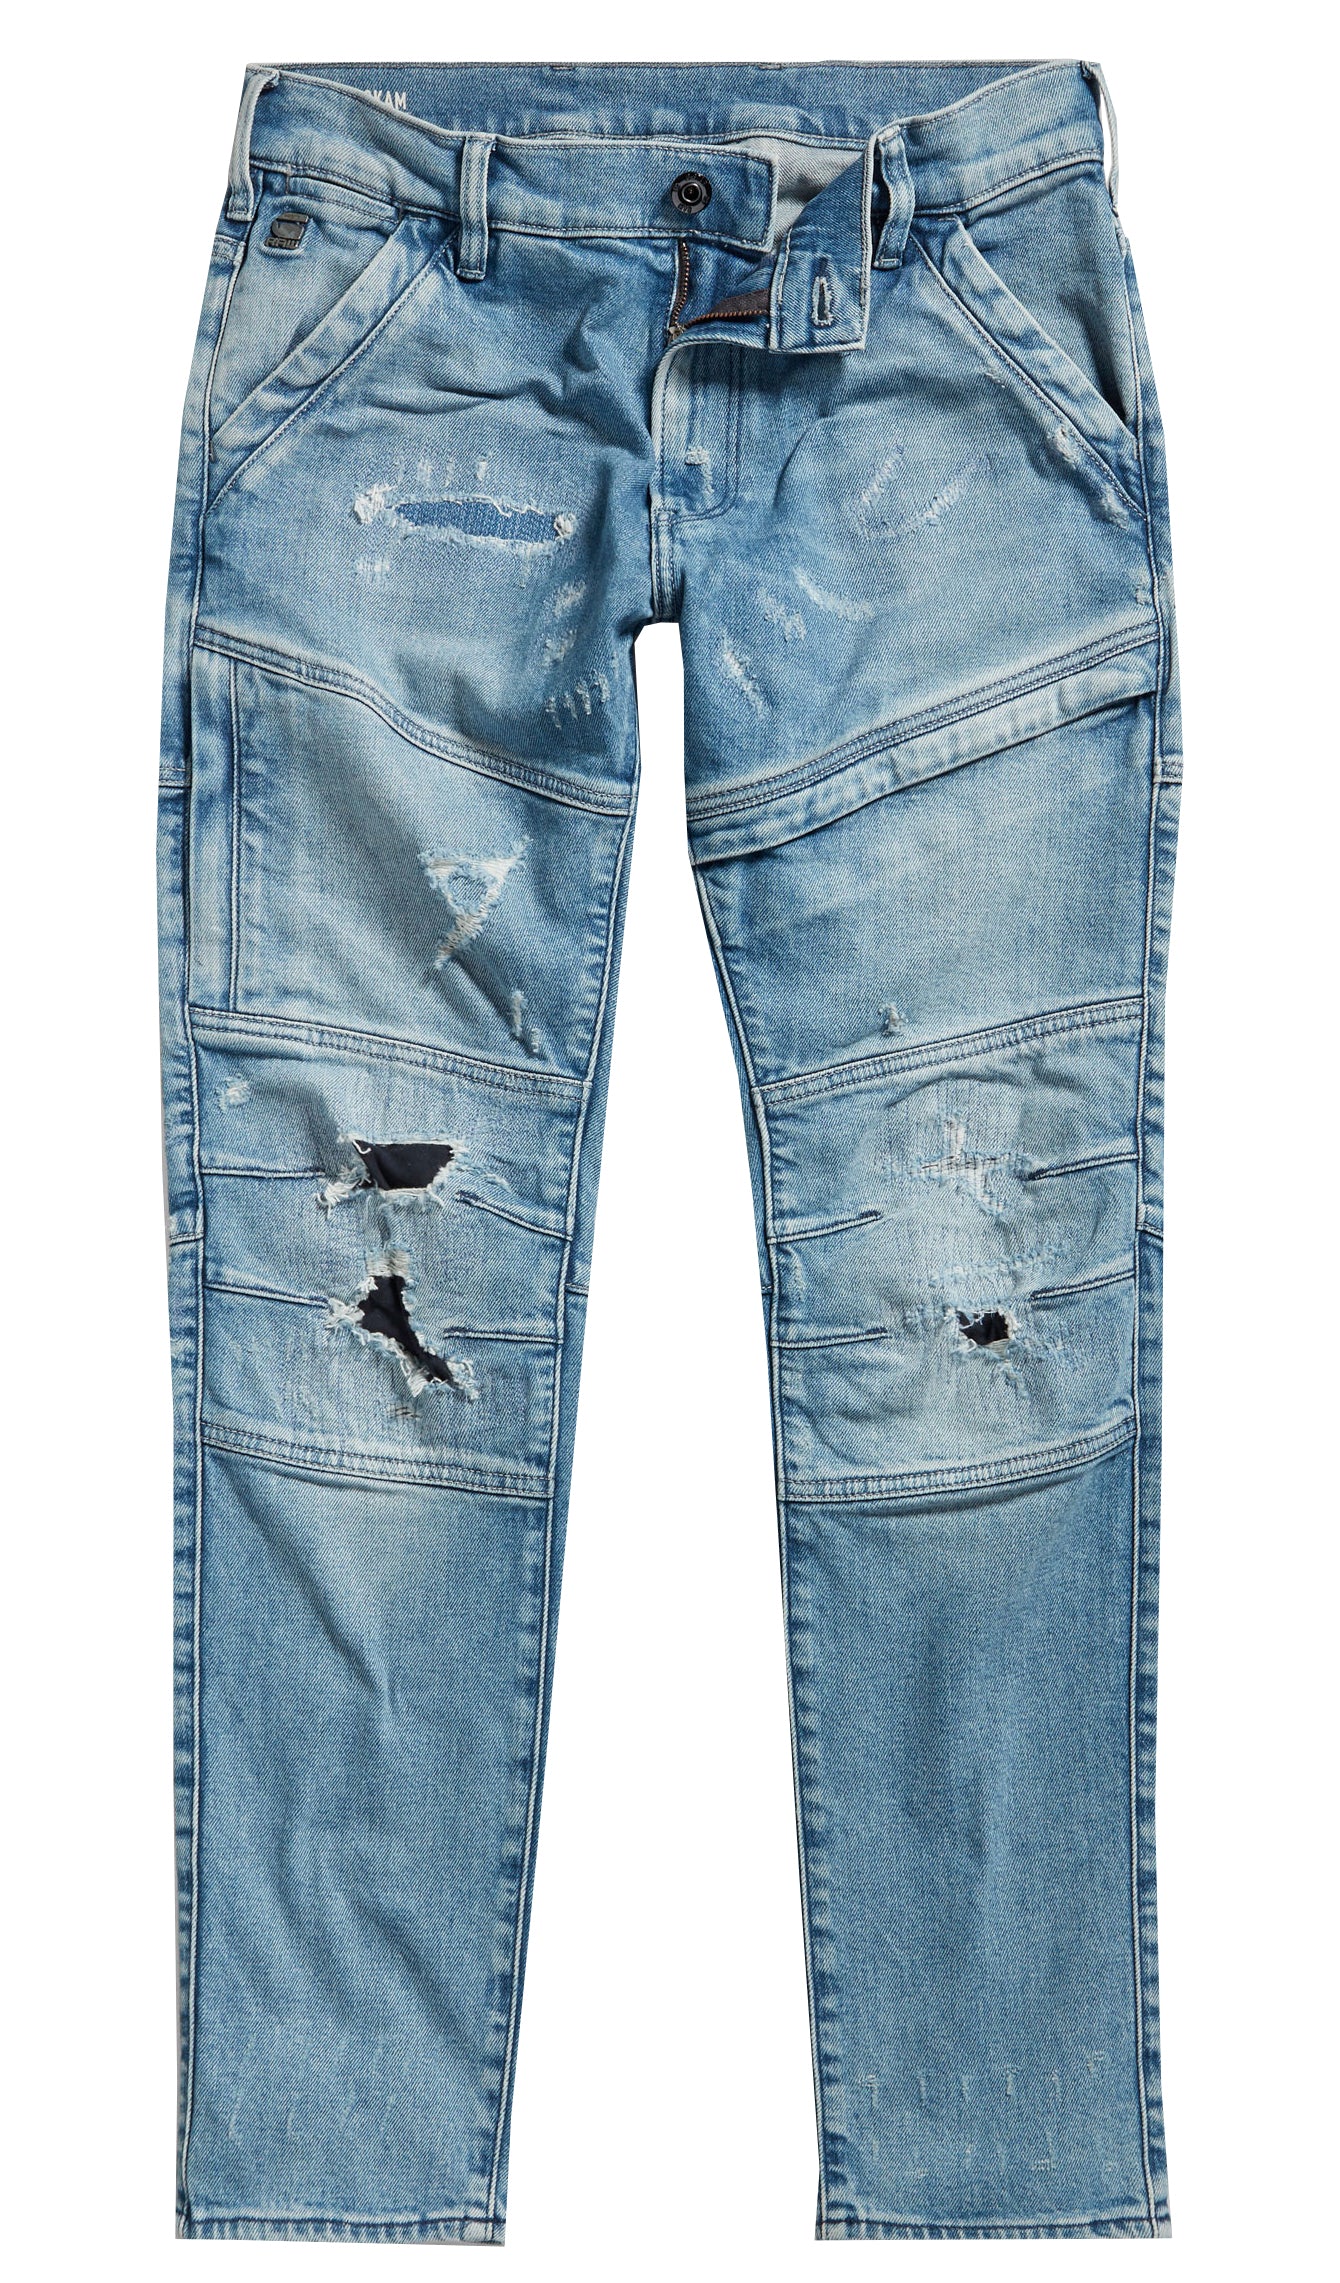 Description  Founded on the philosophy “Just the product”, G-star RAW has become a leader in the denim industry. The brand is known for crafting distinct, textured pieces with soul.      Style# D06763-D316-G022     Gender: Men's     3D zip Knee regular tapered     Color: Sun Faded Tucson Restored     Front and Back pockets     Button and zip Closure     Belt Loops